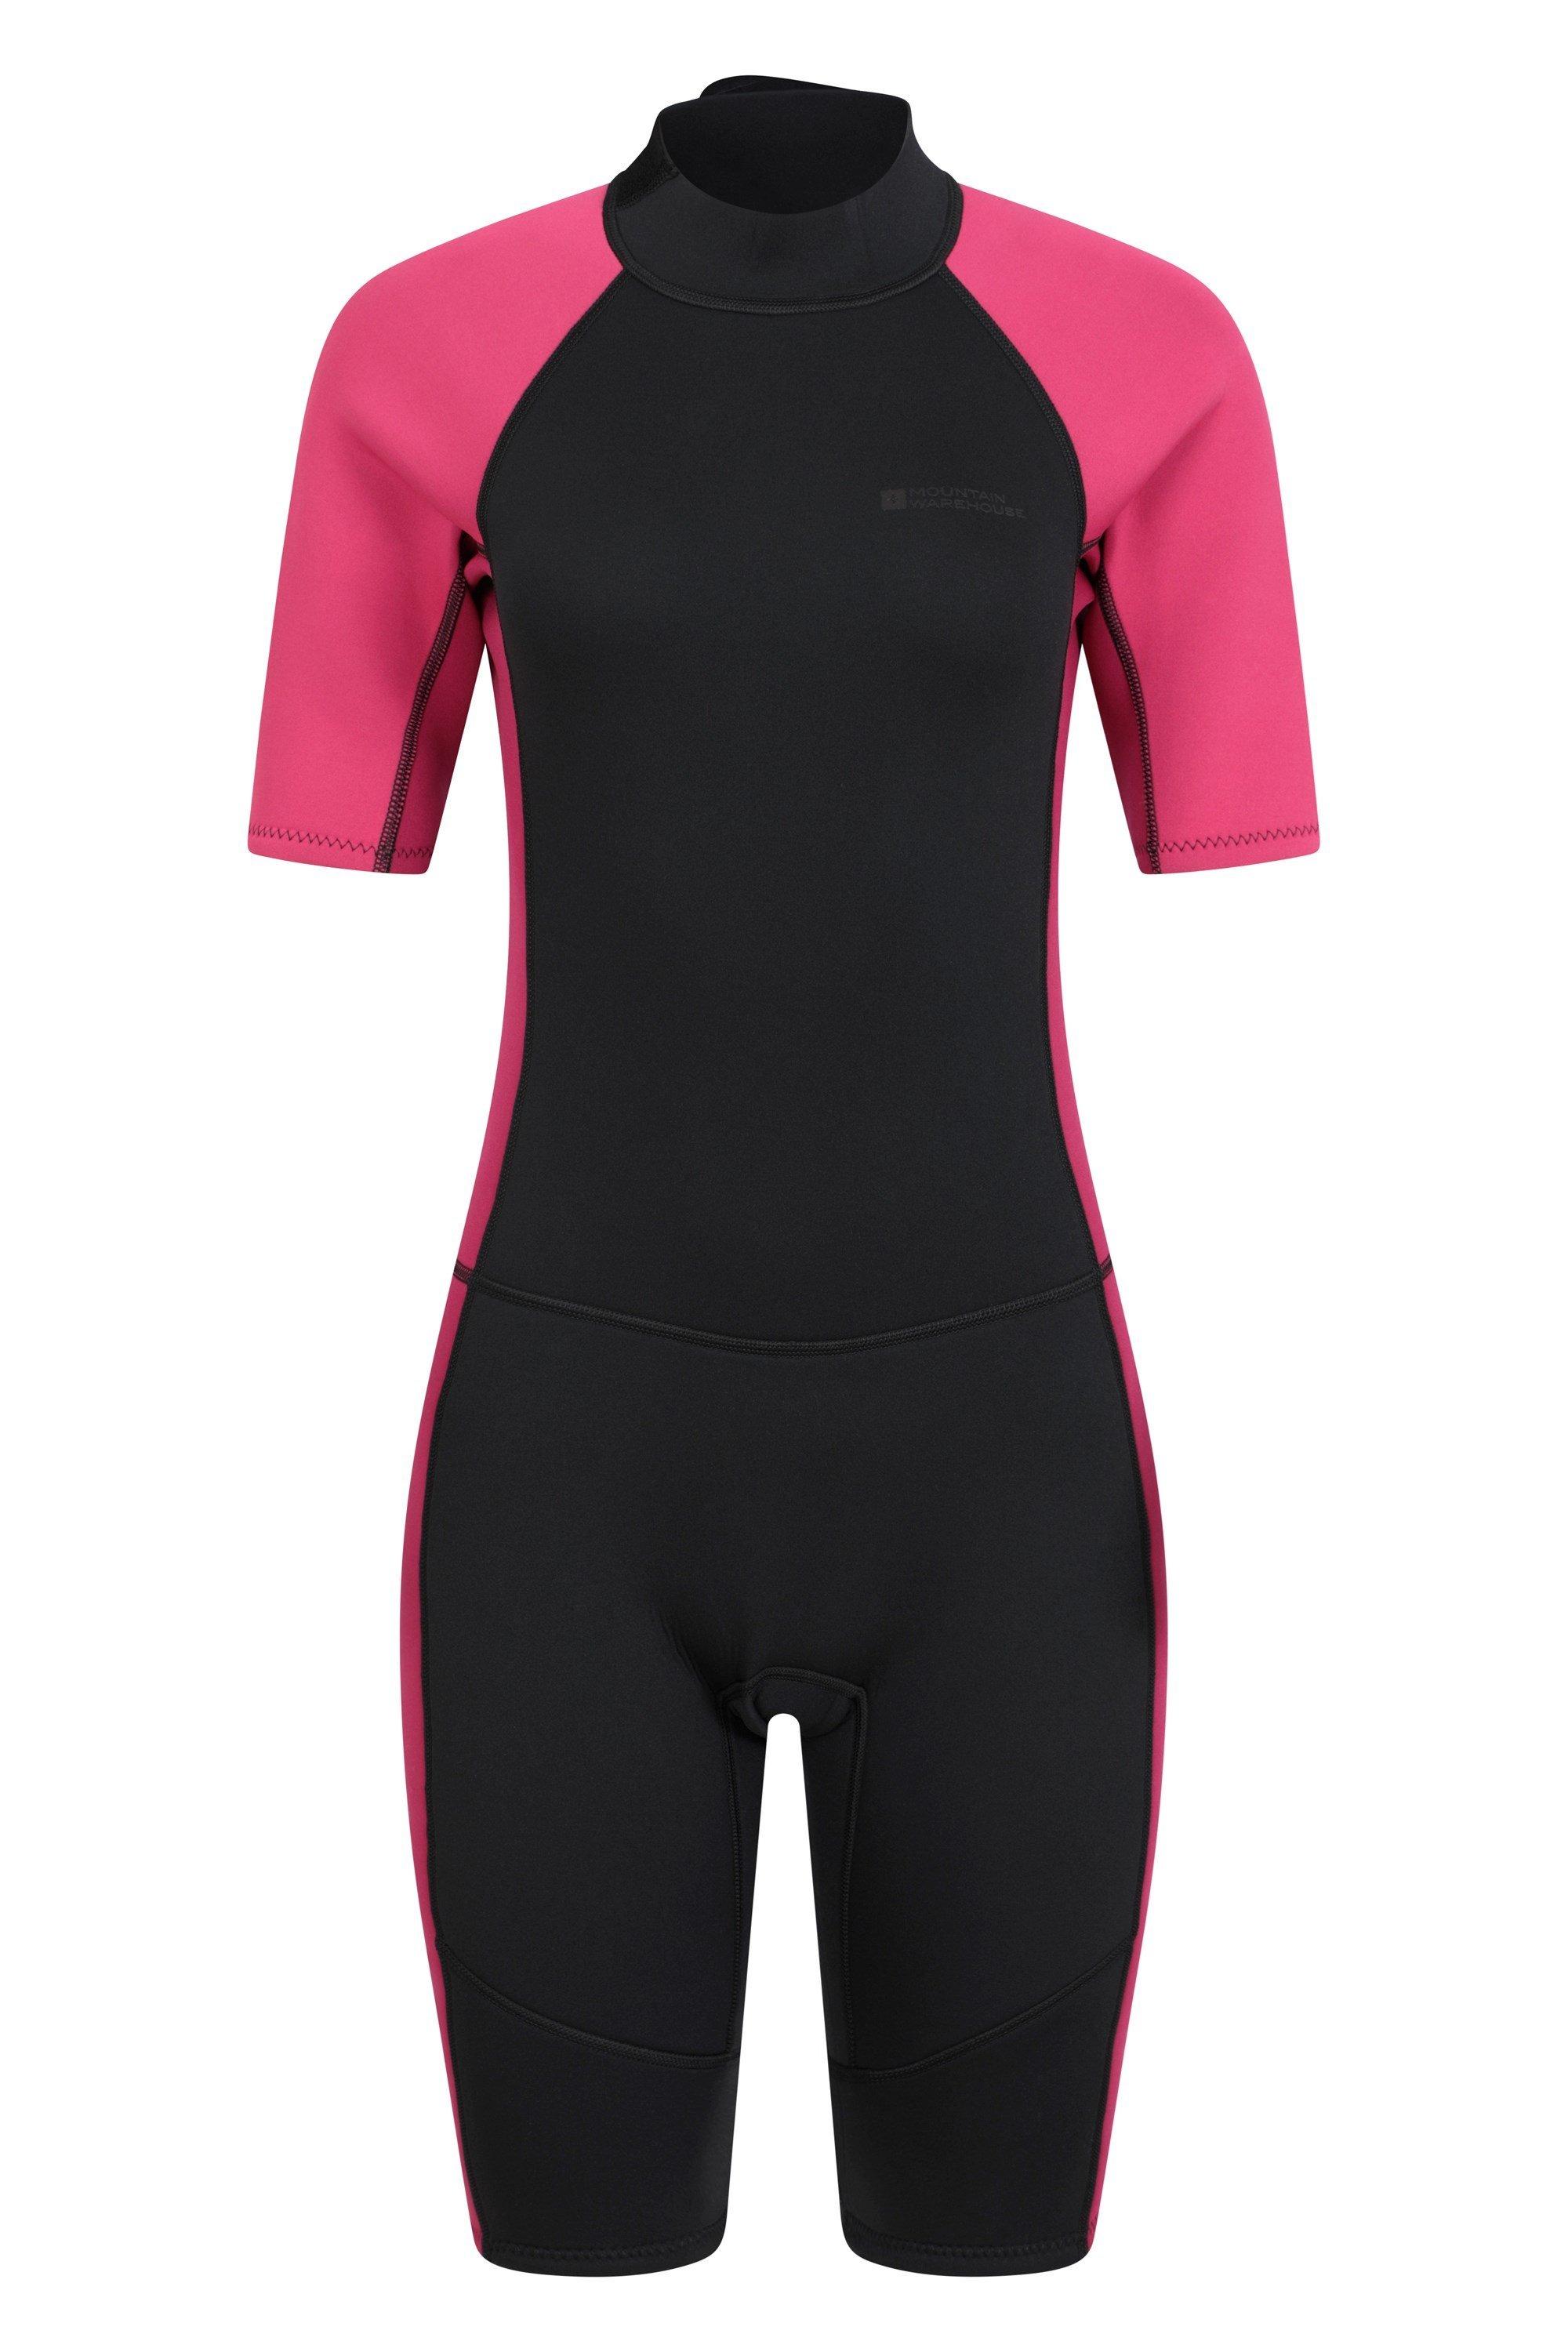 Shorty Wetsuit Lightweight Fast Dry Contour Fit